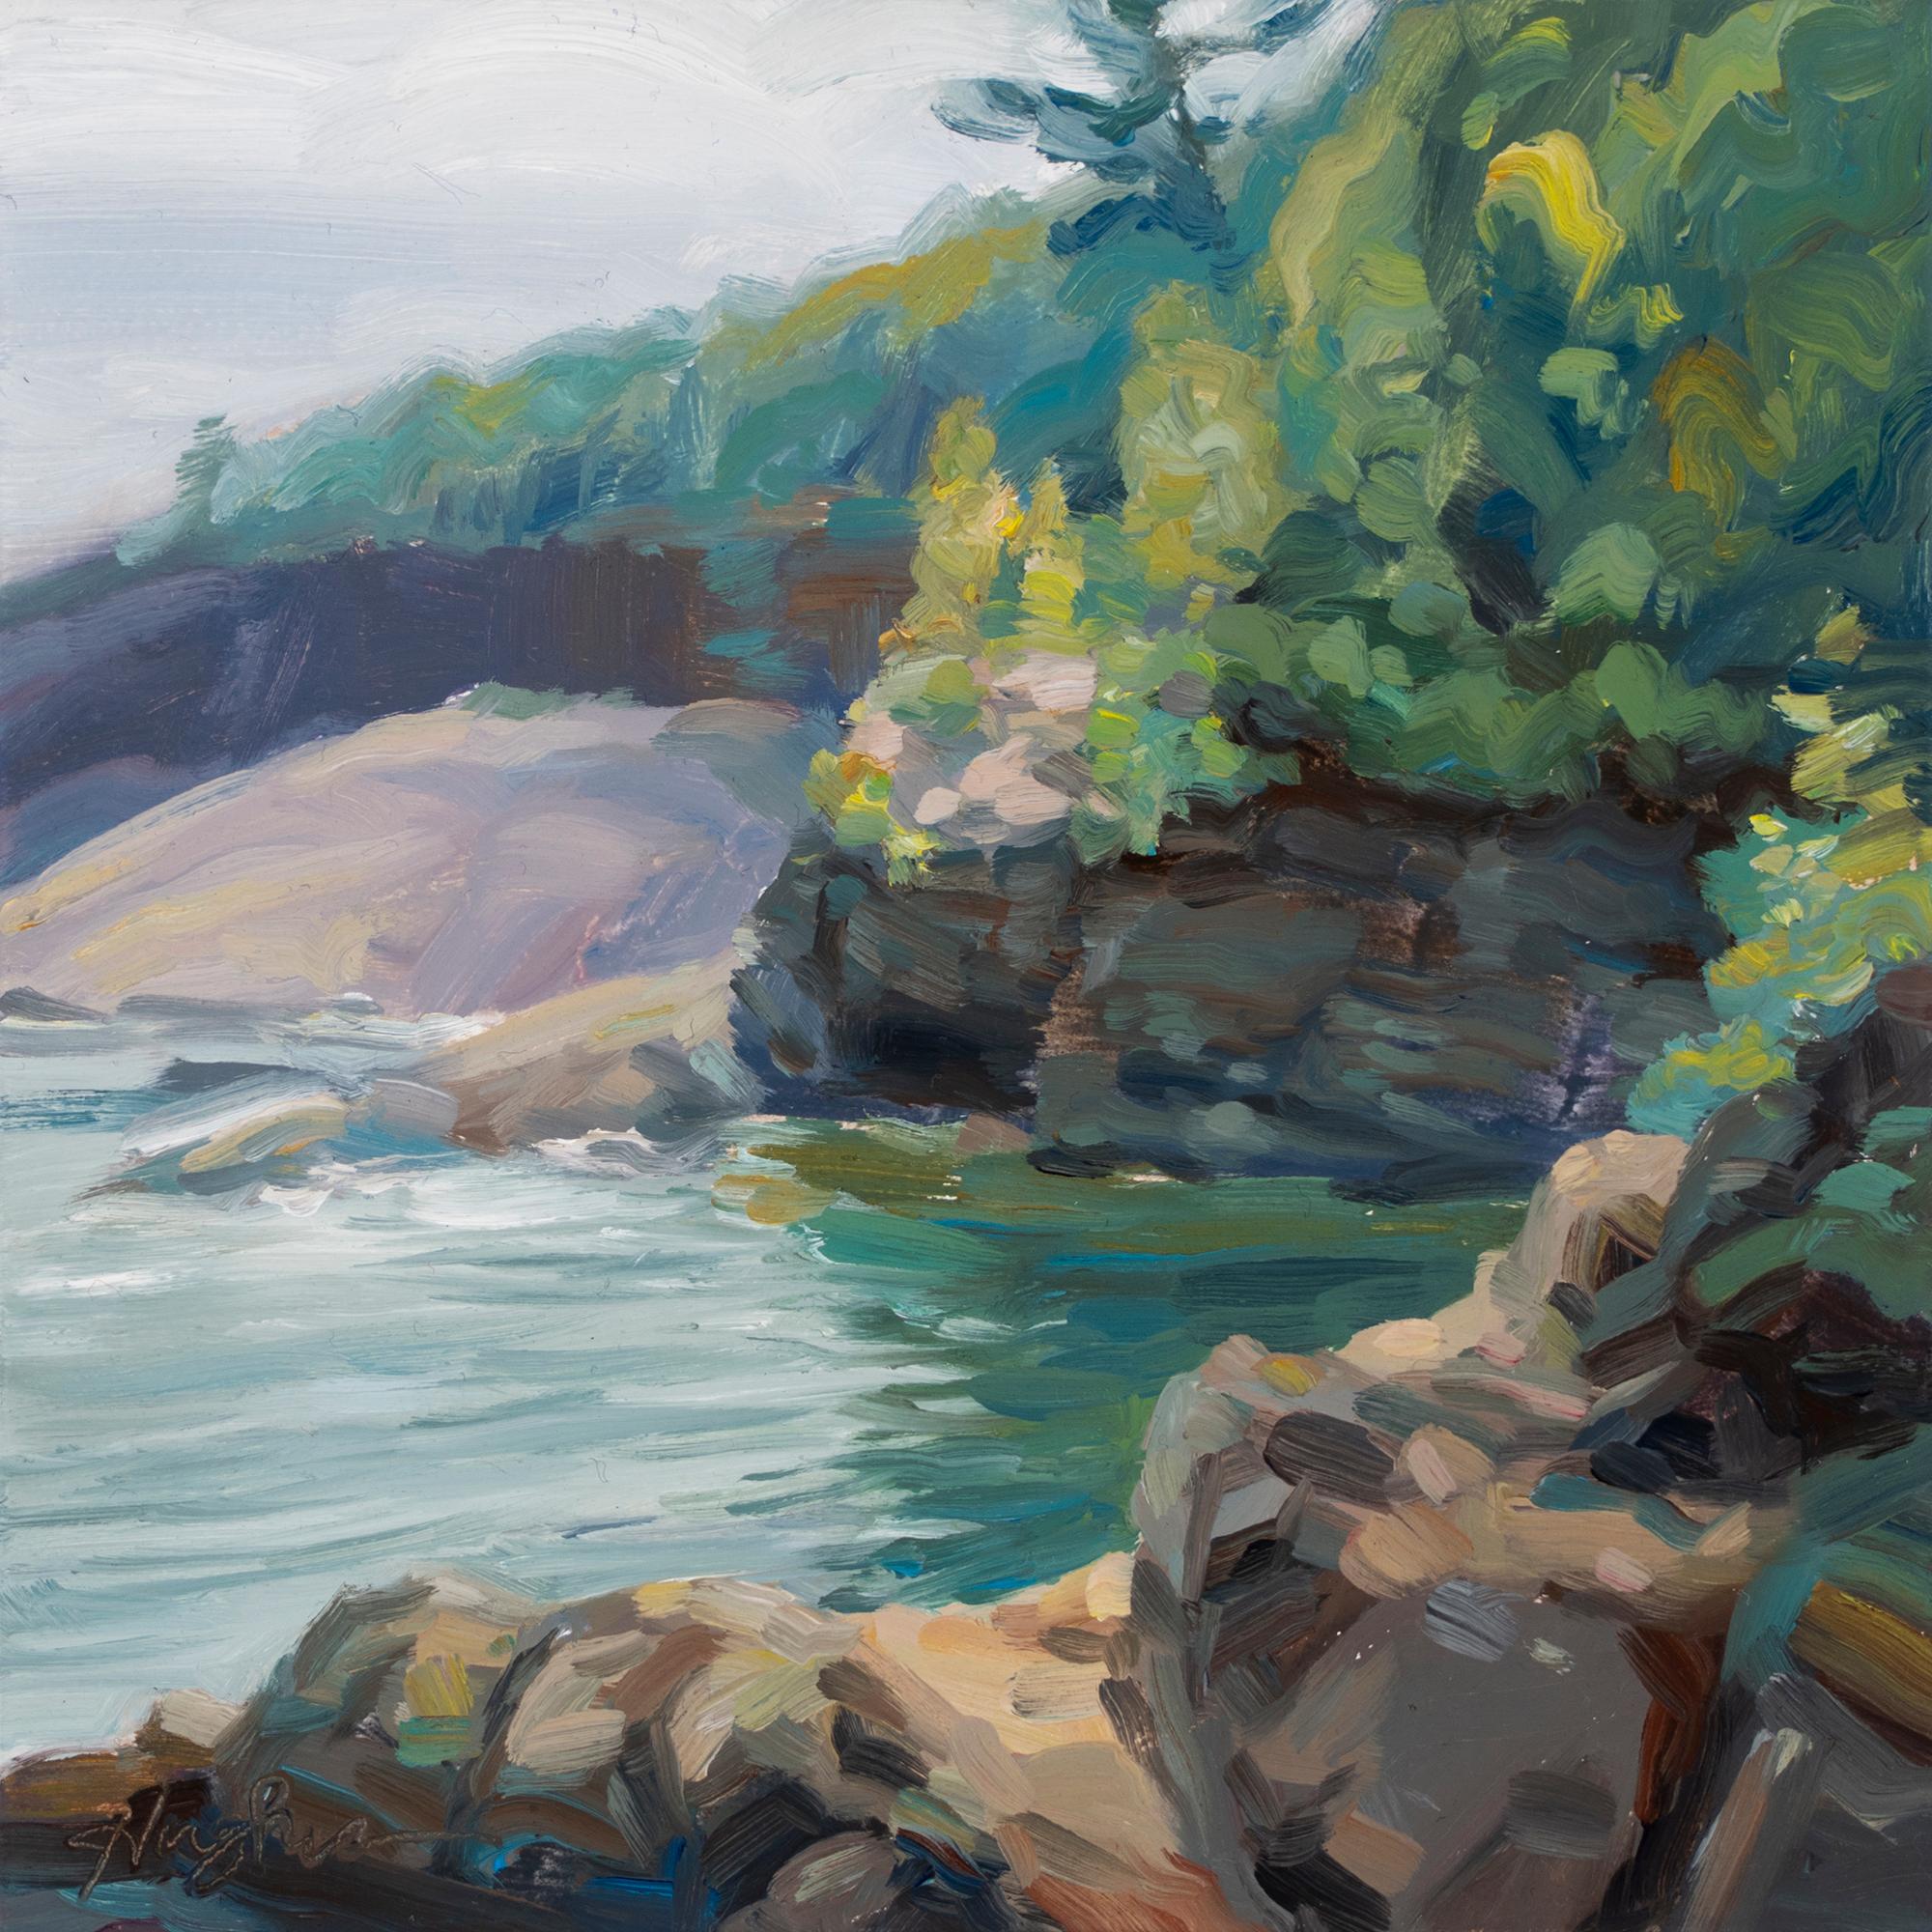 Primary Hughes Landscape Painting - "Presque Isle (Day 44), September 15, 2020" Oil Painting